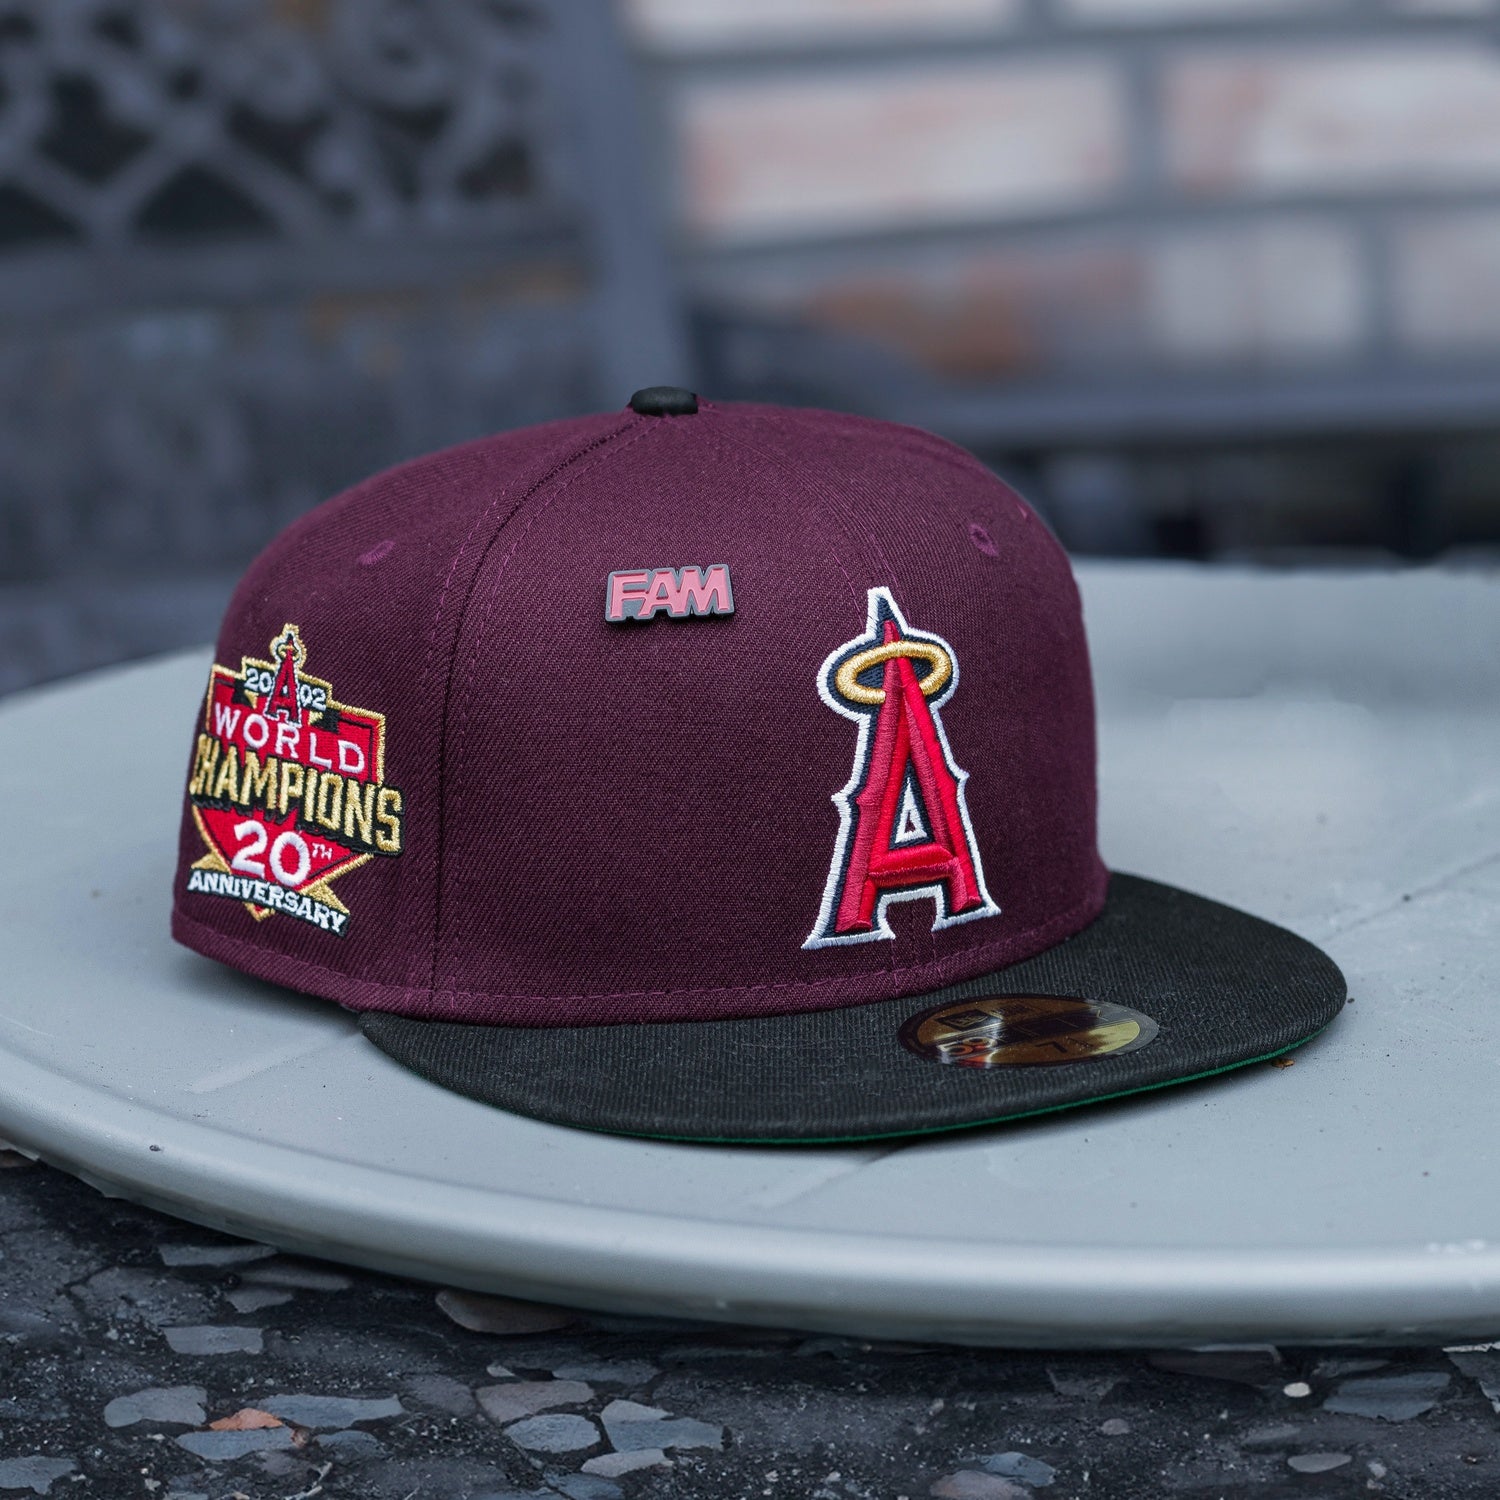 NEW ERA 59FIFTY MLB ANAHEIM ANGELS 20TH ANNIVERSARY TWO TONE / KELLY GREEN UV FITTED CAP